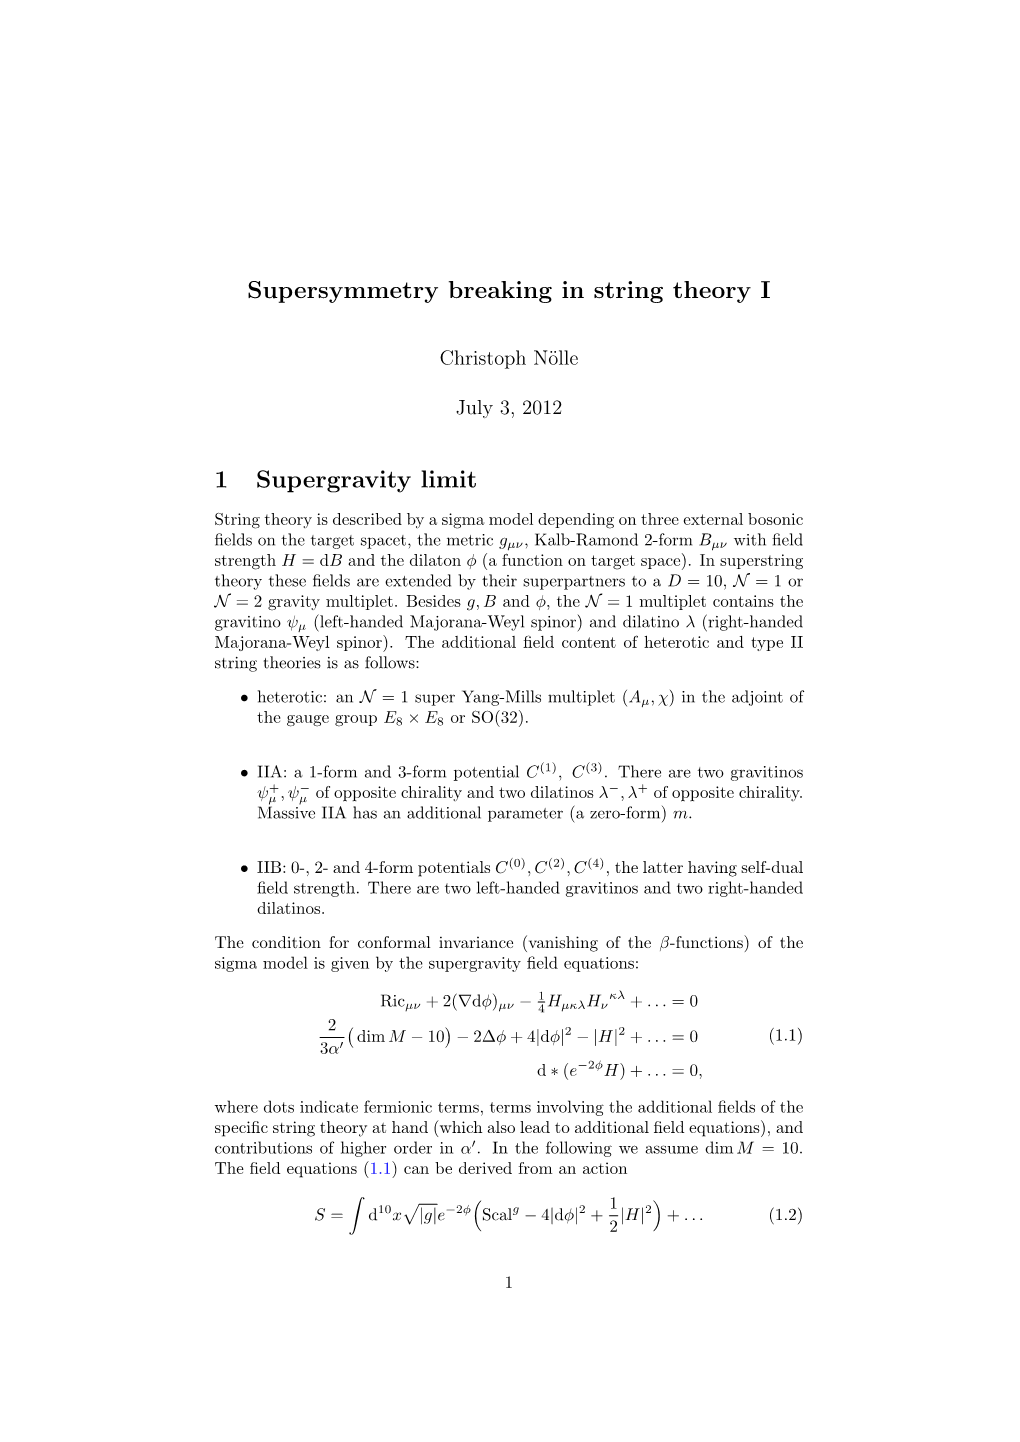 Supersymmetry Breaking in String Theory I 1 Supergravity Limit